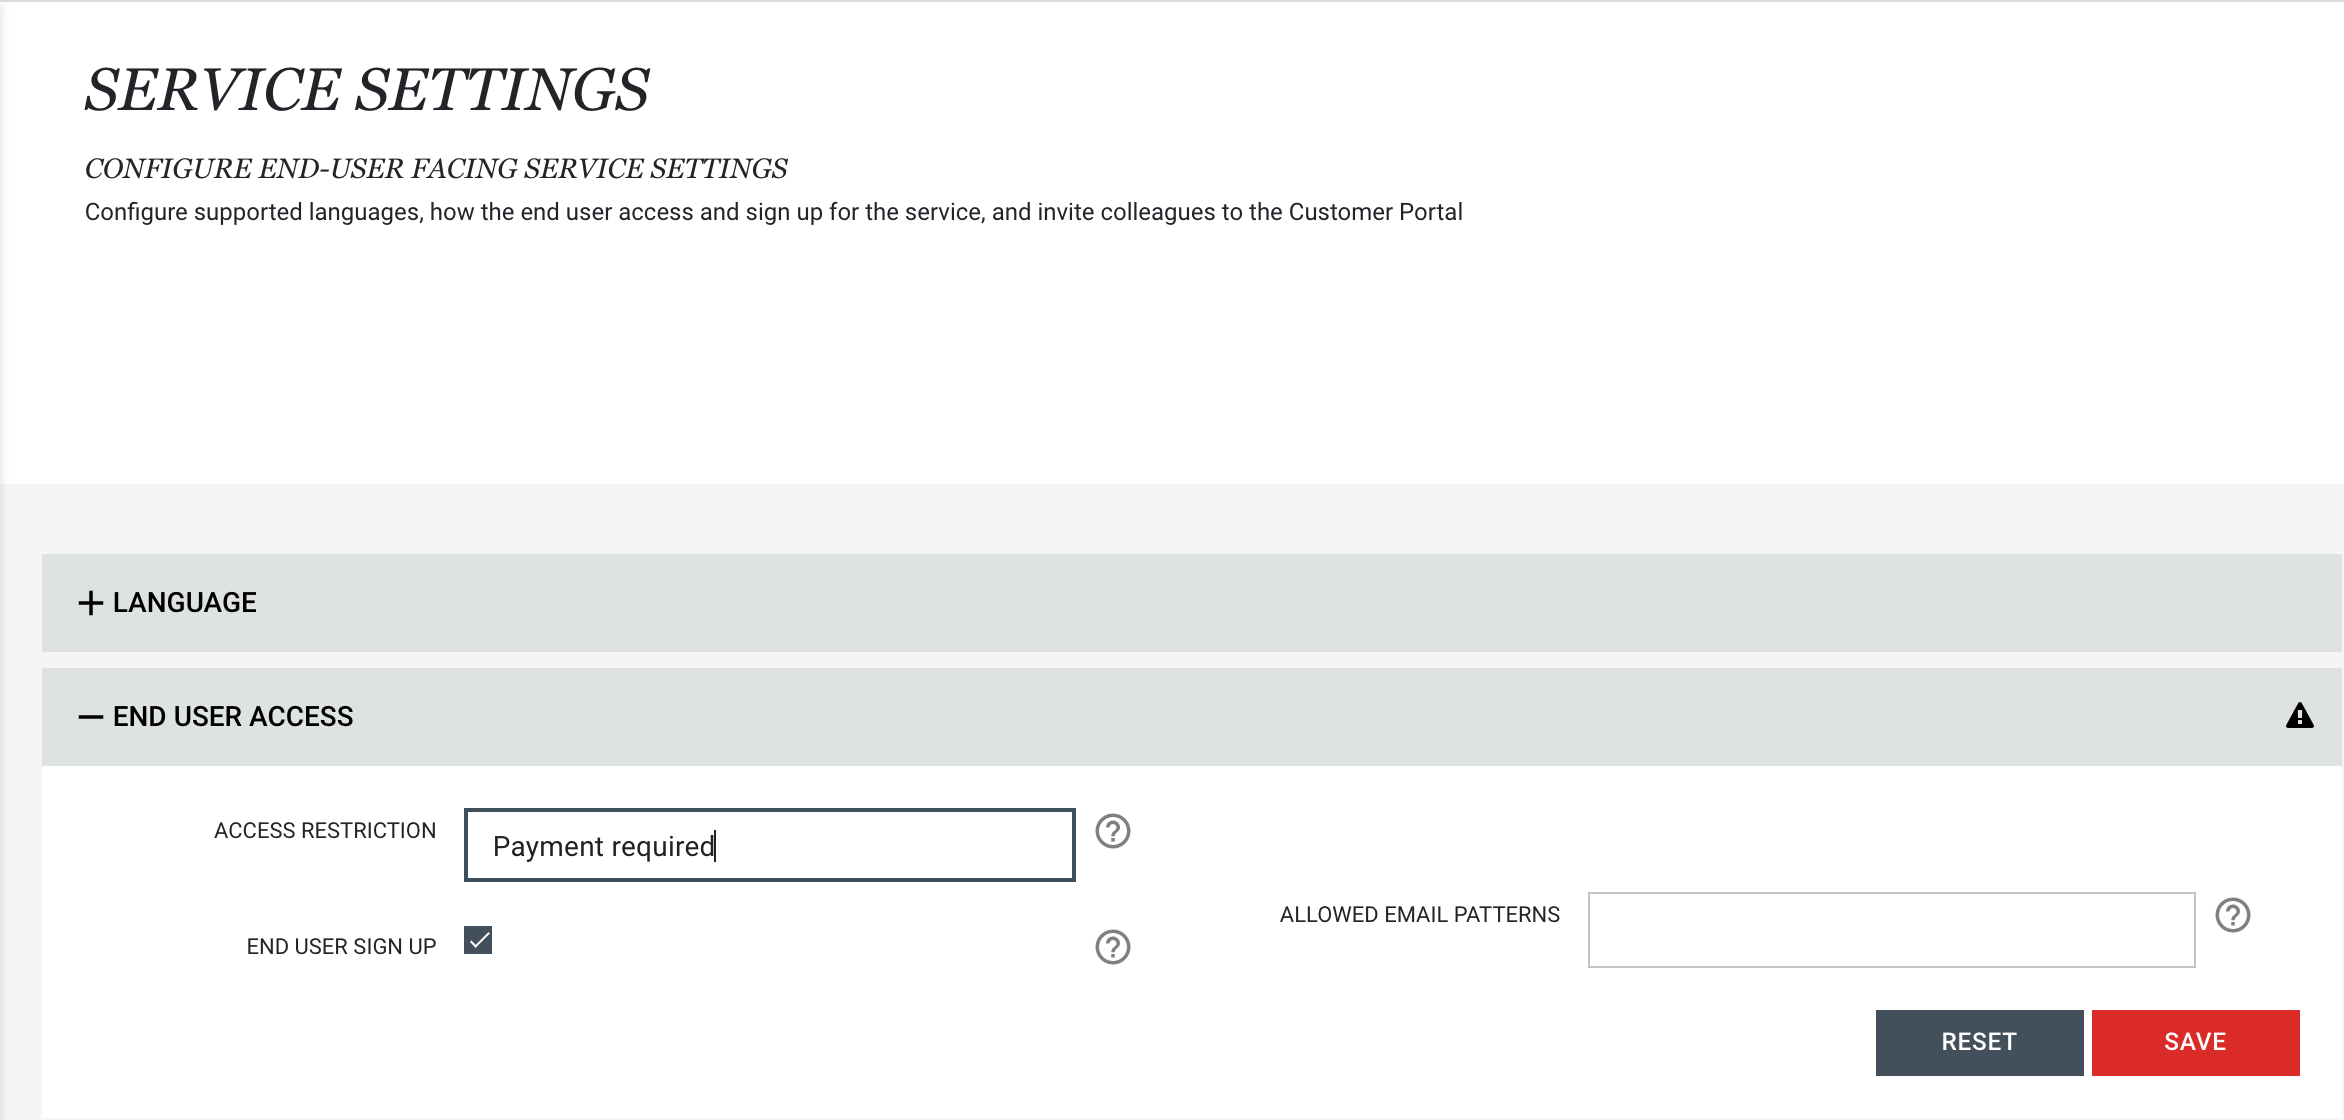 Customer Portal End User Access - Payment is Required